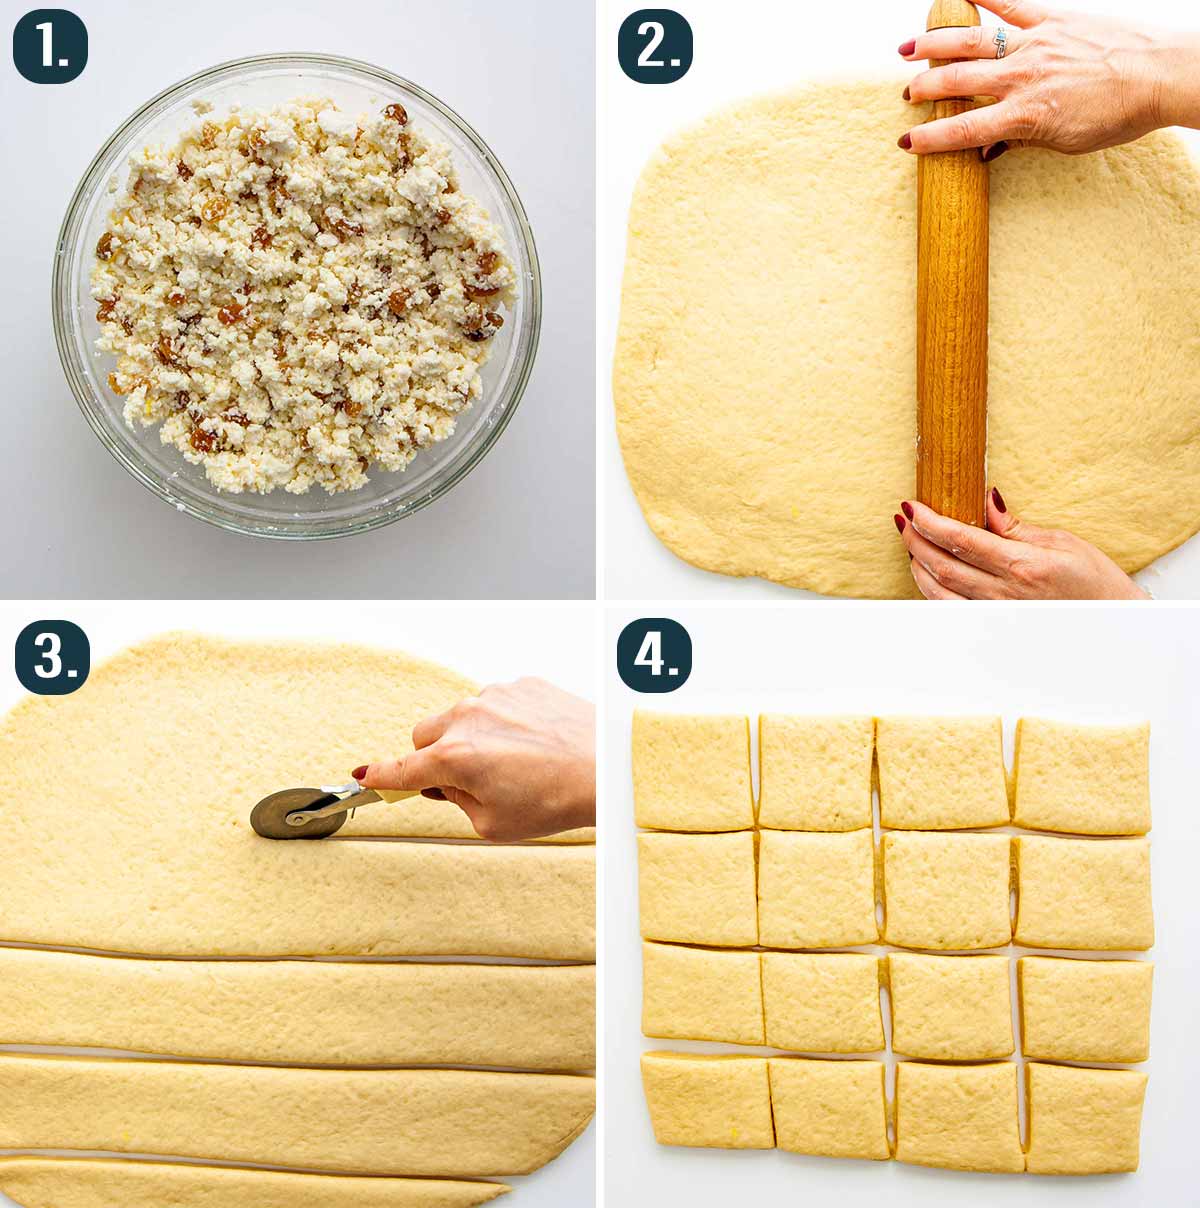 process shots showing how to prep the dough and roll it out for cheese buns.